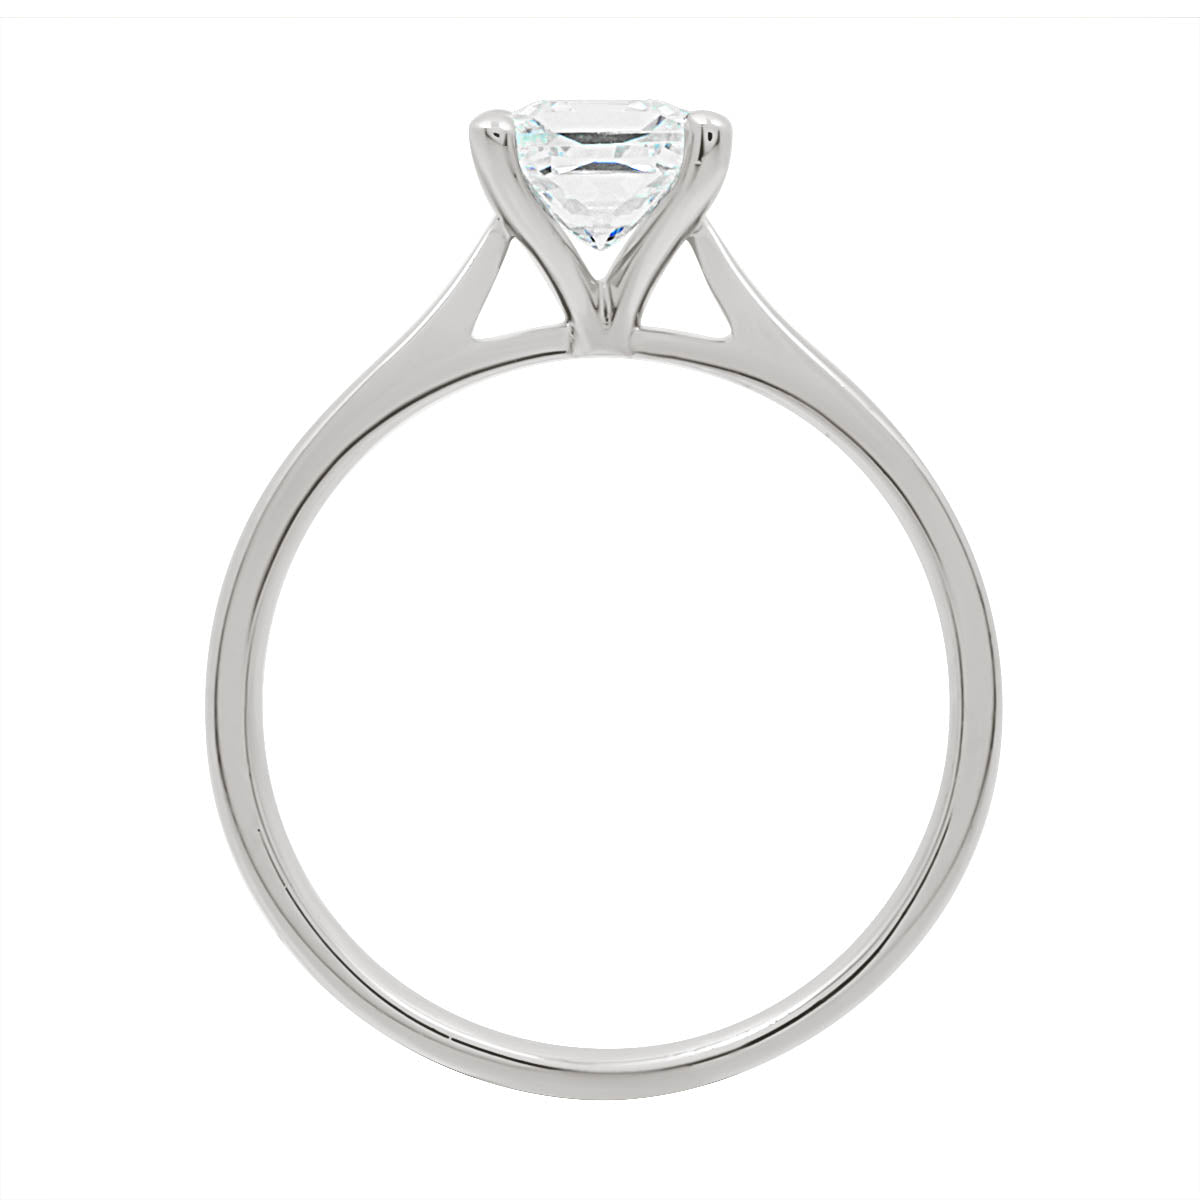 Princess Cut Diamond Ring in white gold in an upright position